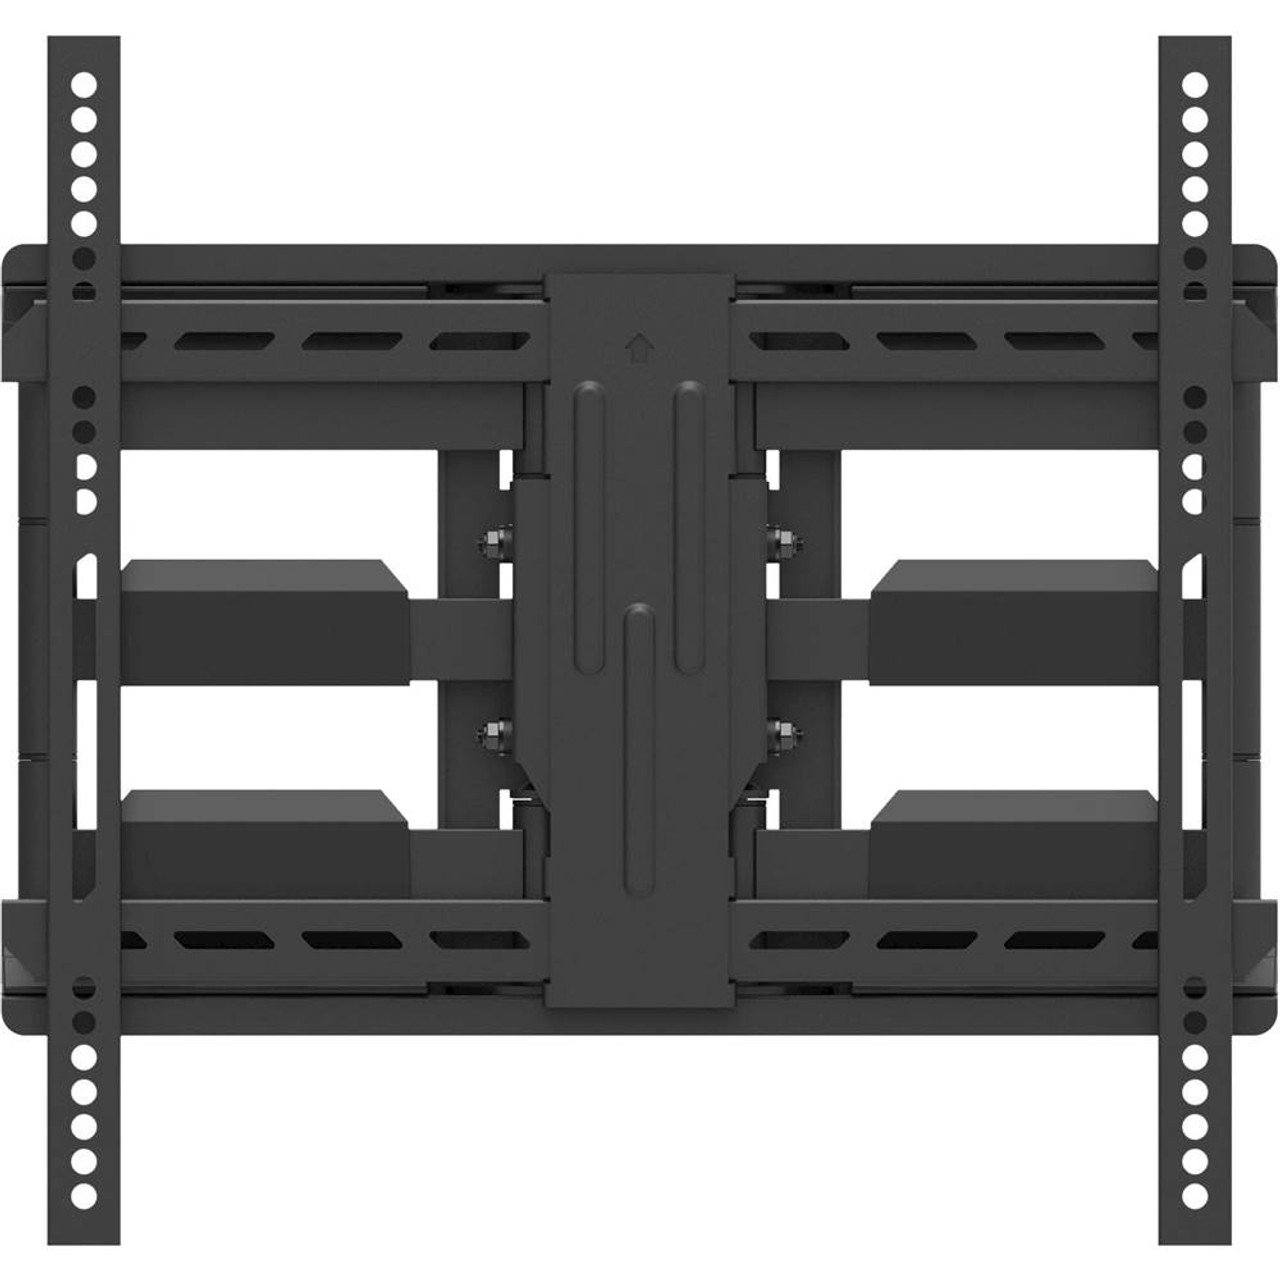 Kanto - Full-Motion TV Wall Mount for Most 34" - 65" TVs - Extends 17" - Black